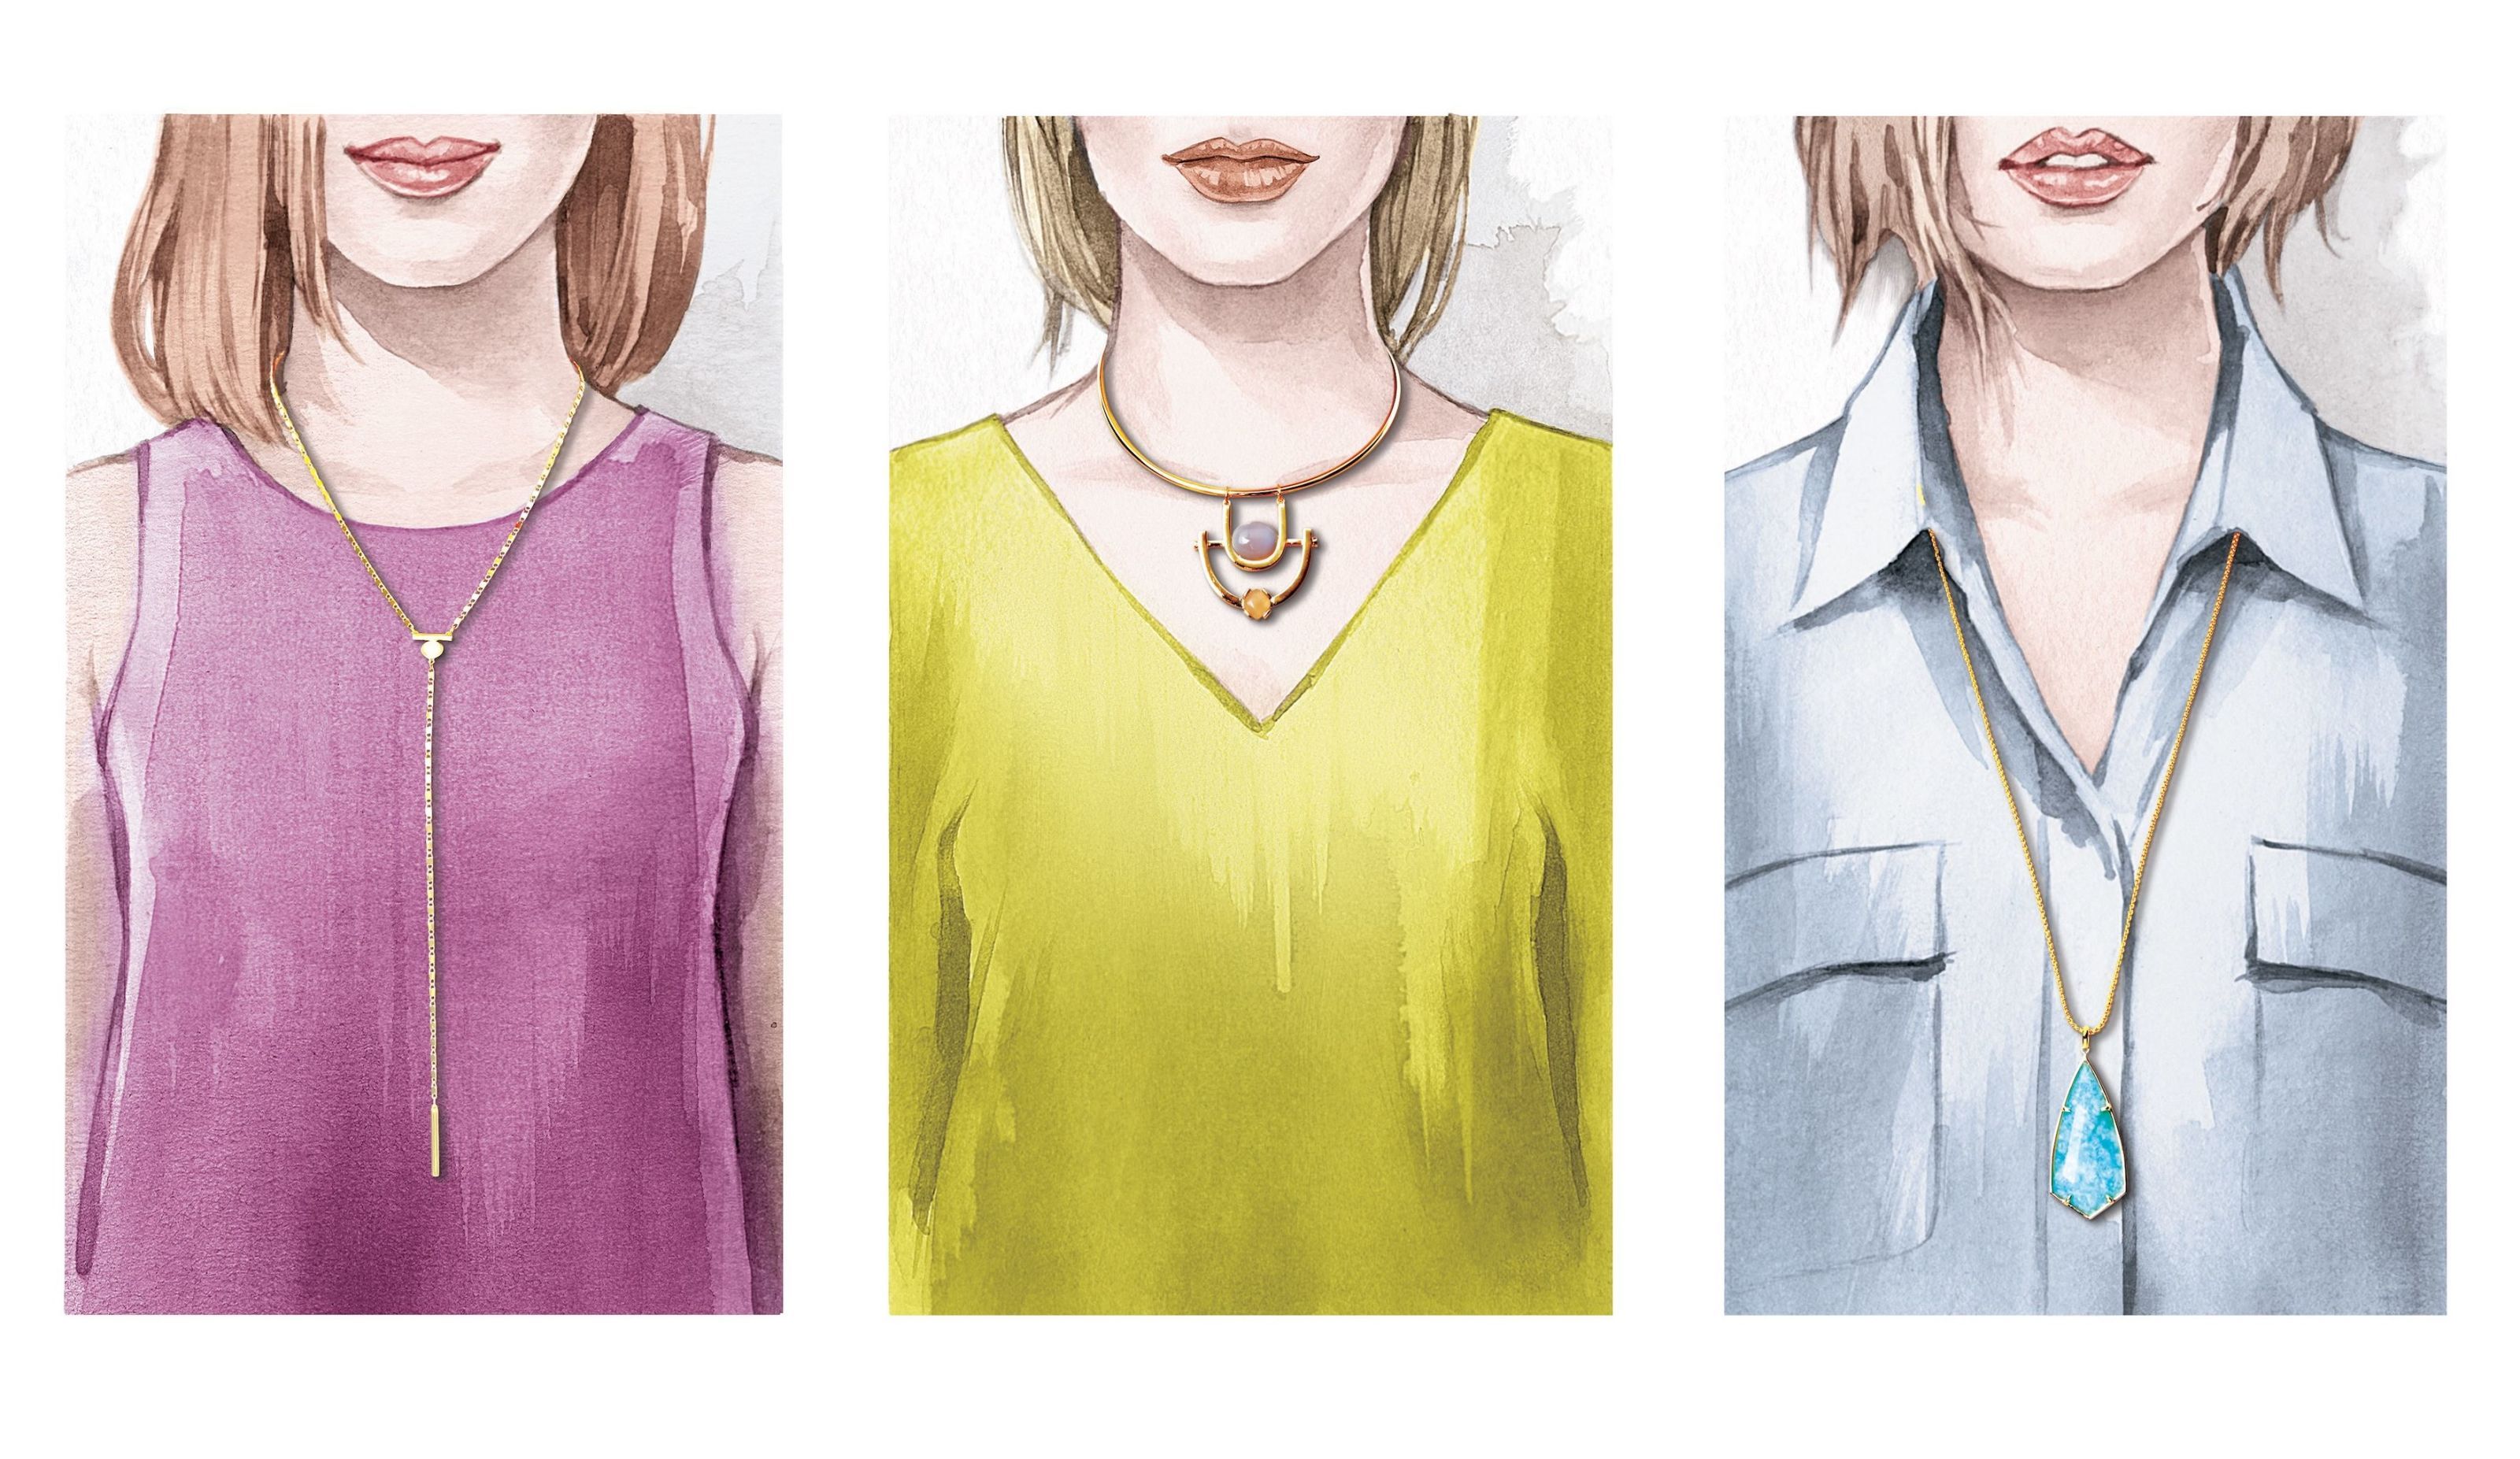 10 Best Necklace for Deep V-Neck | Auric Jewellery